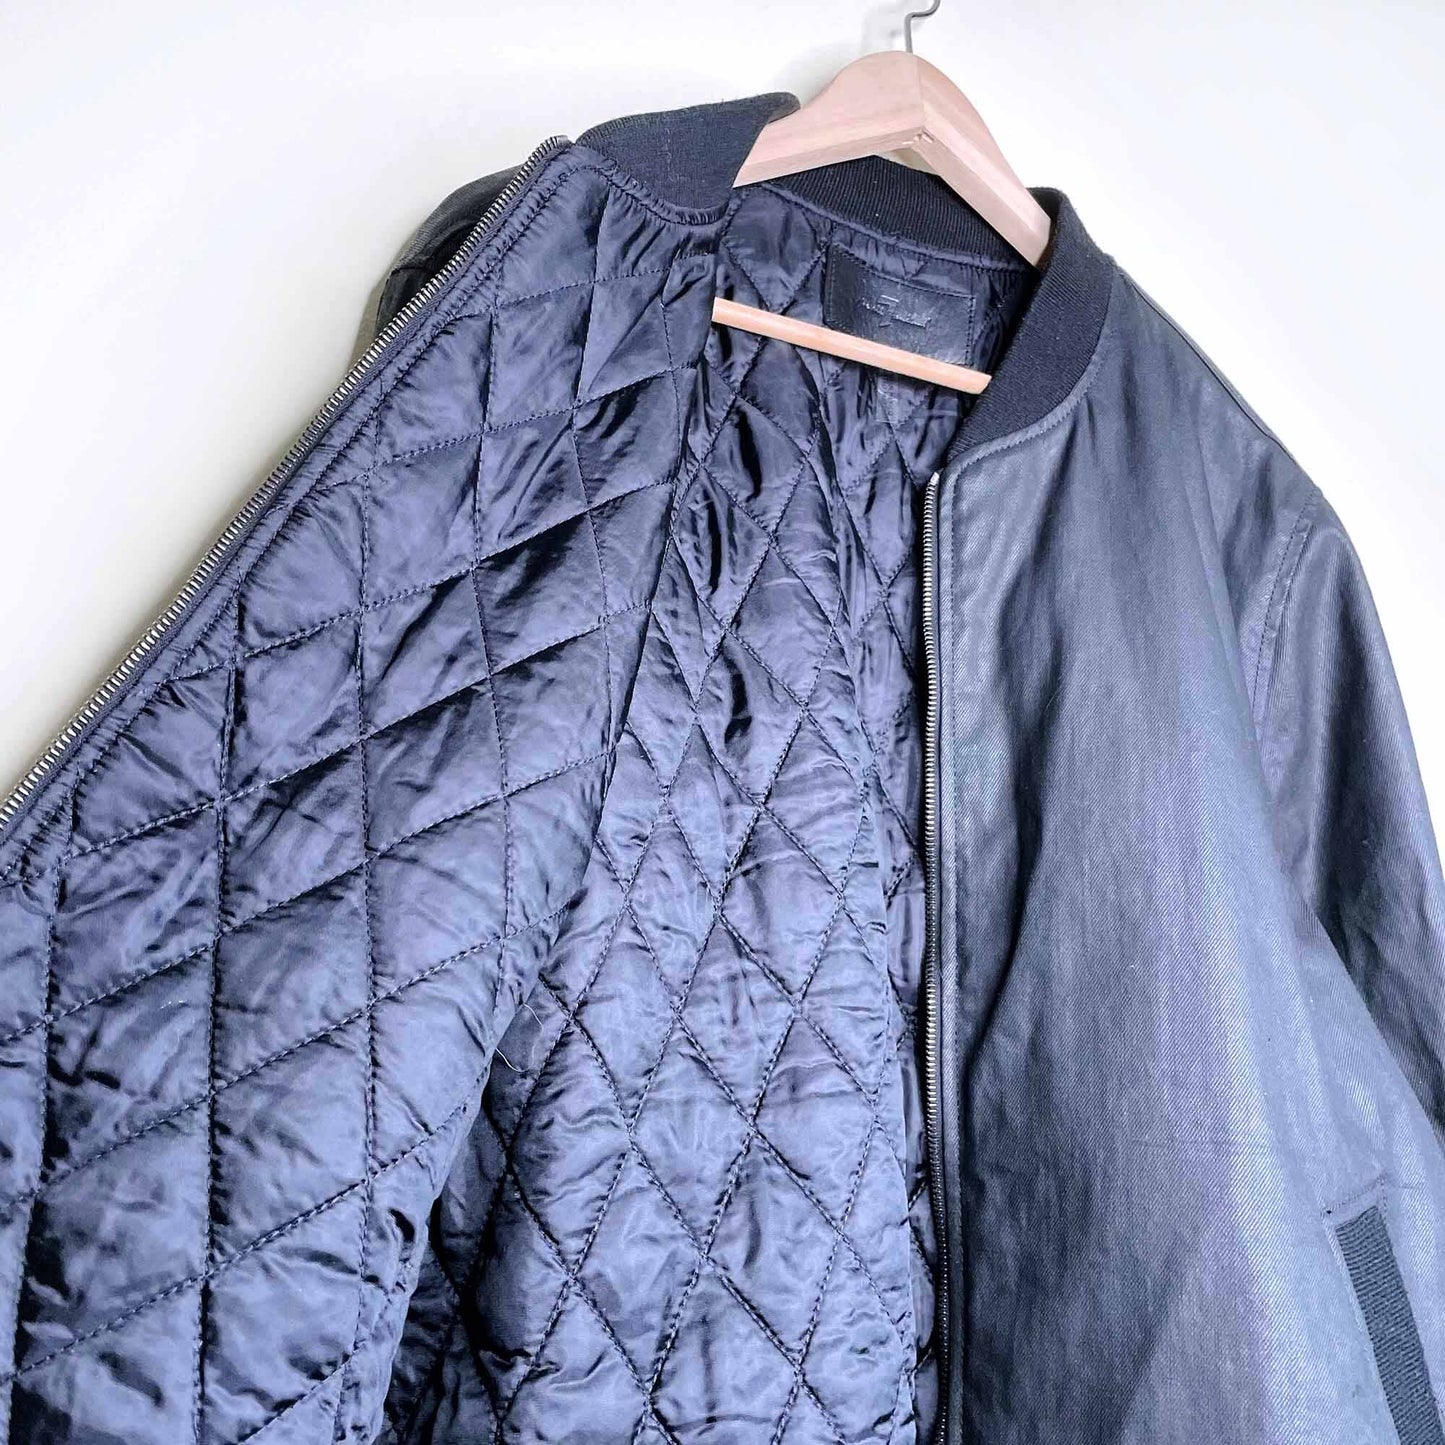 7 for all mankind quilted bomber jacket - size xl